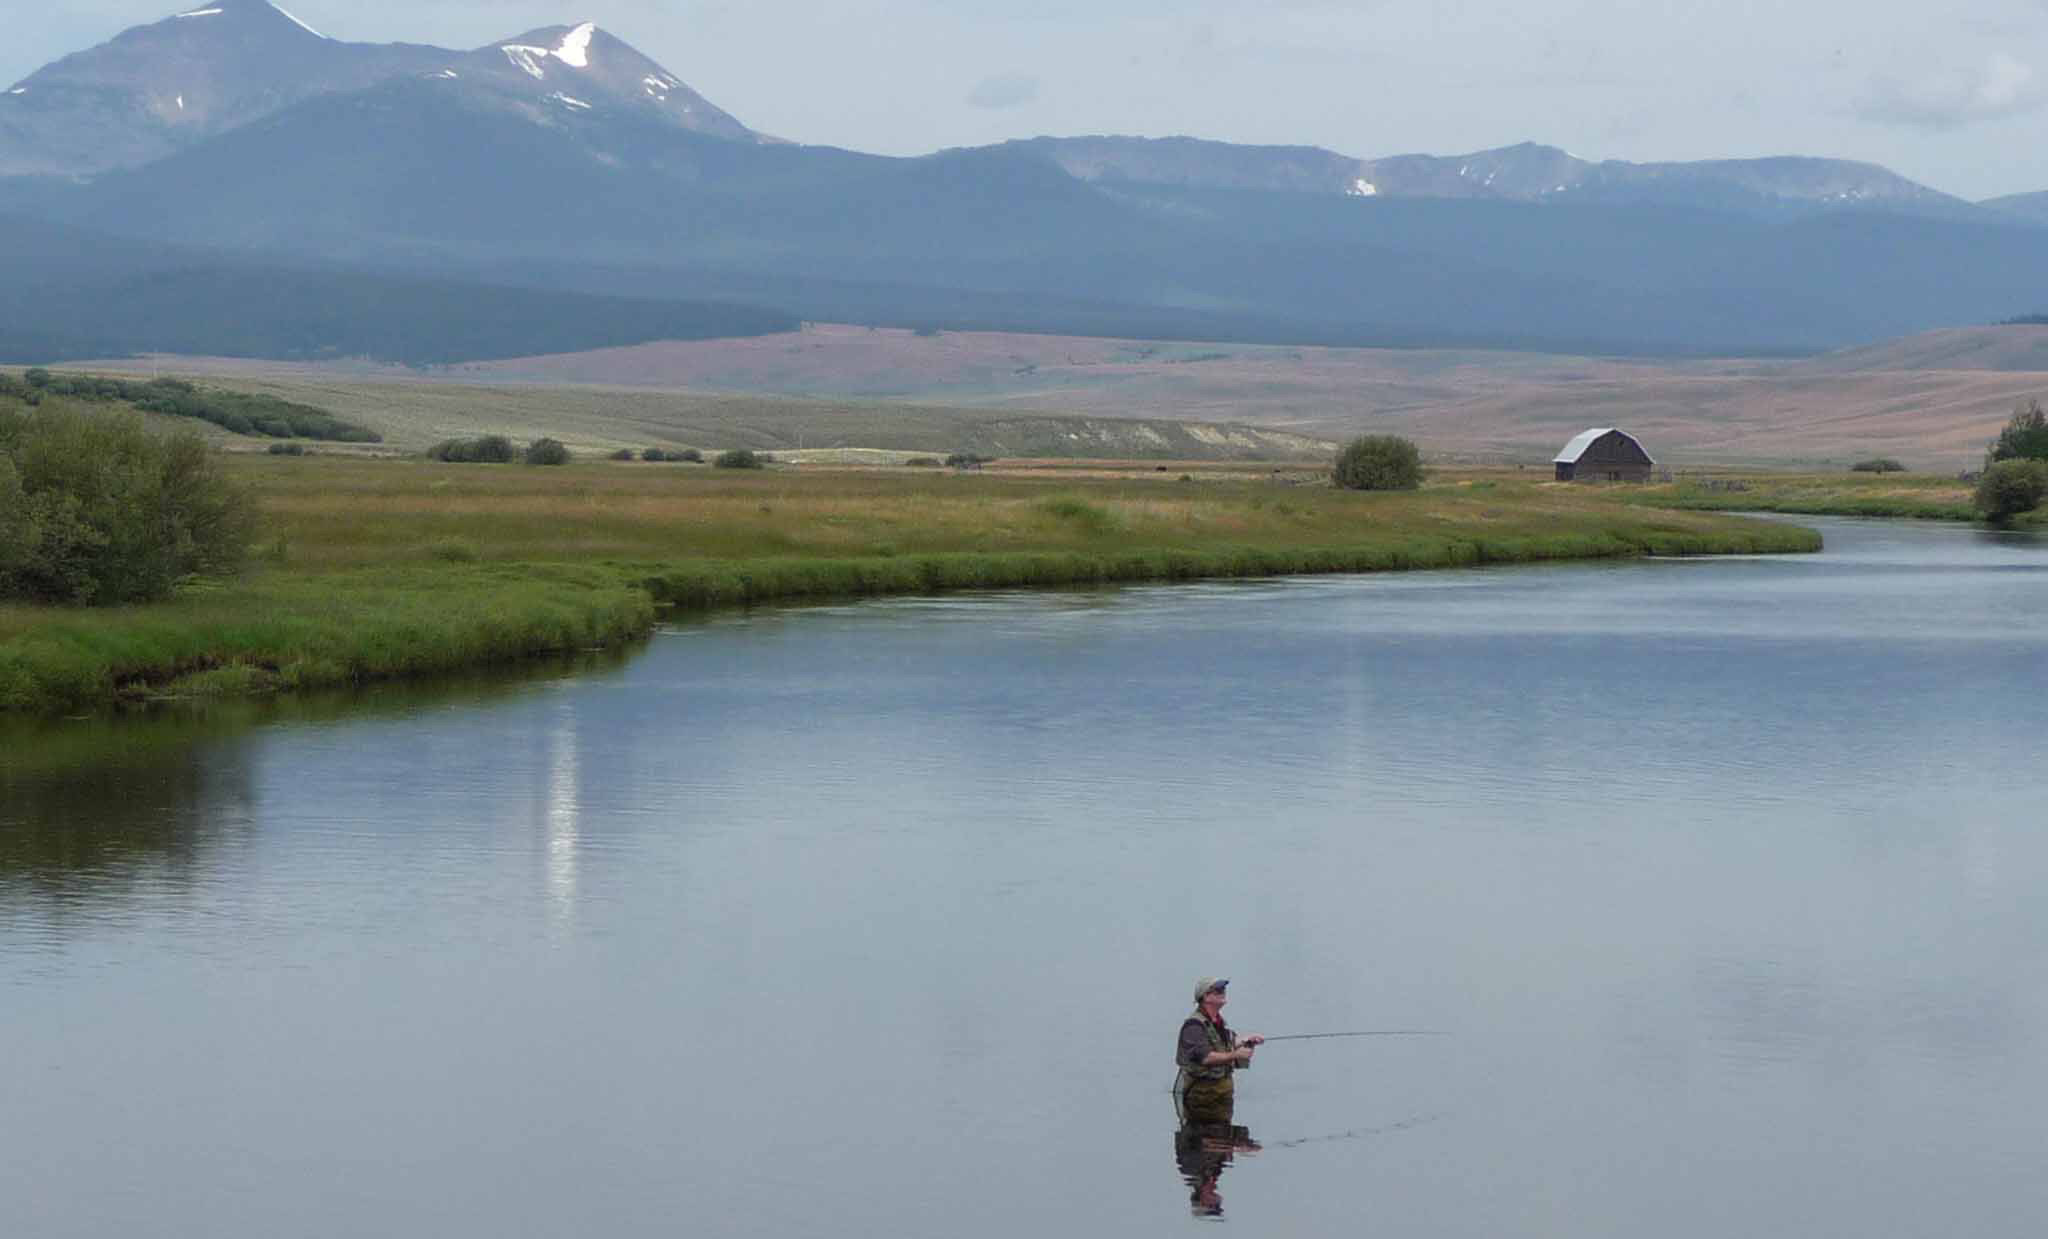 A man fishes in the middle of a river surrounded by farmland and mountains.